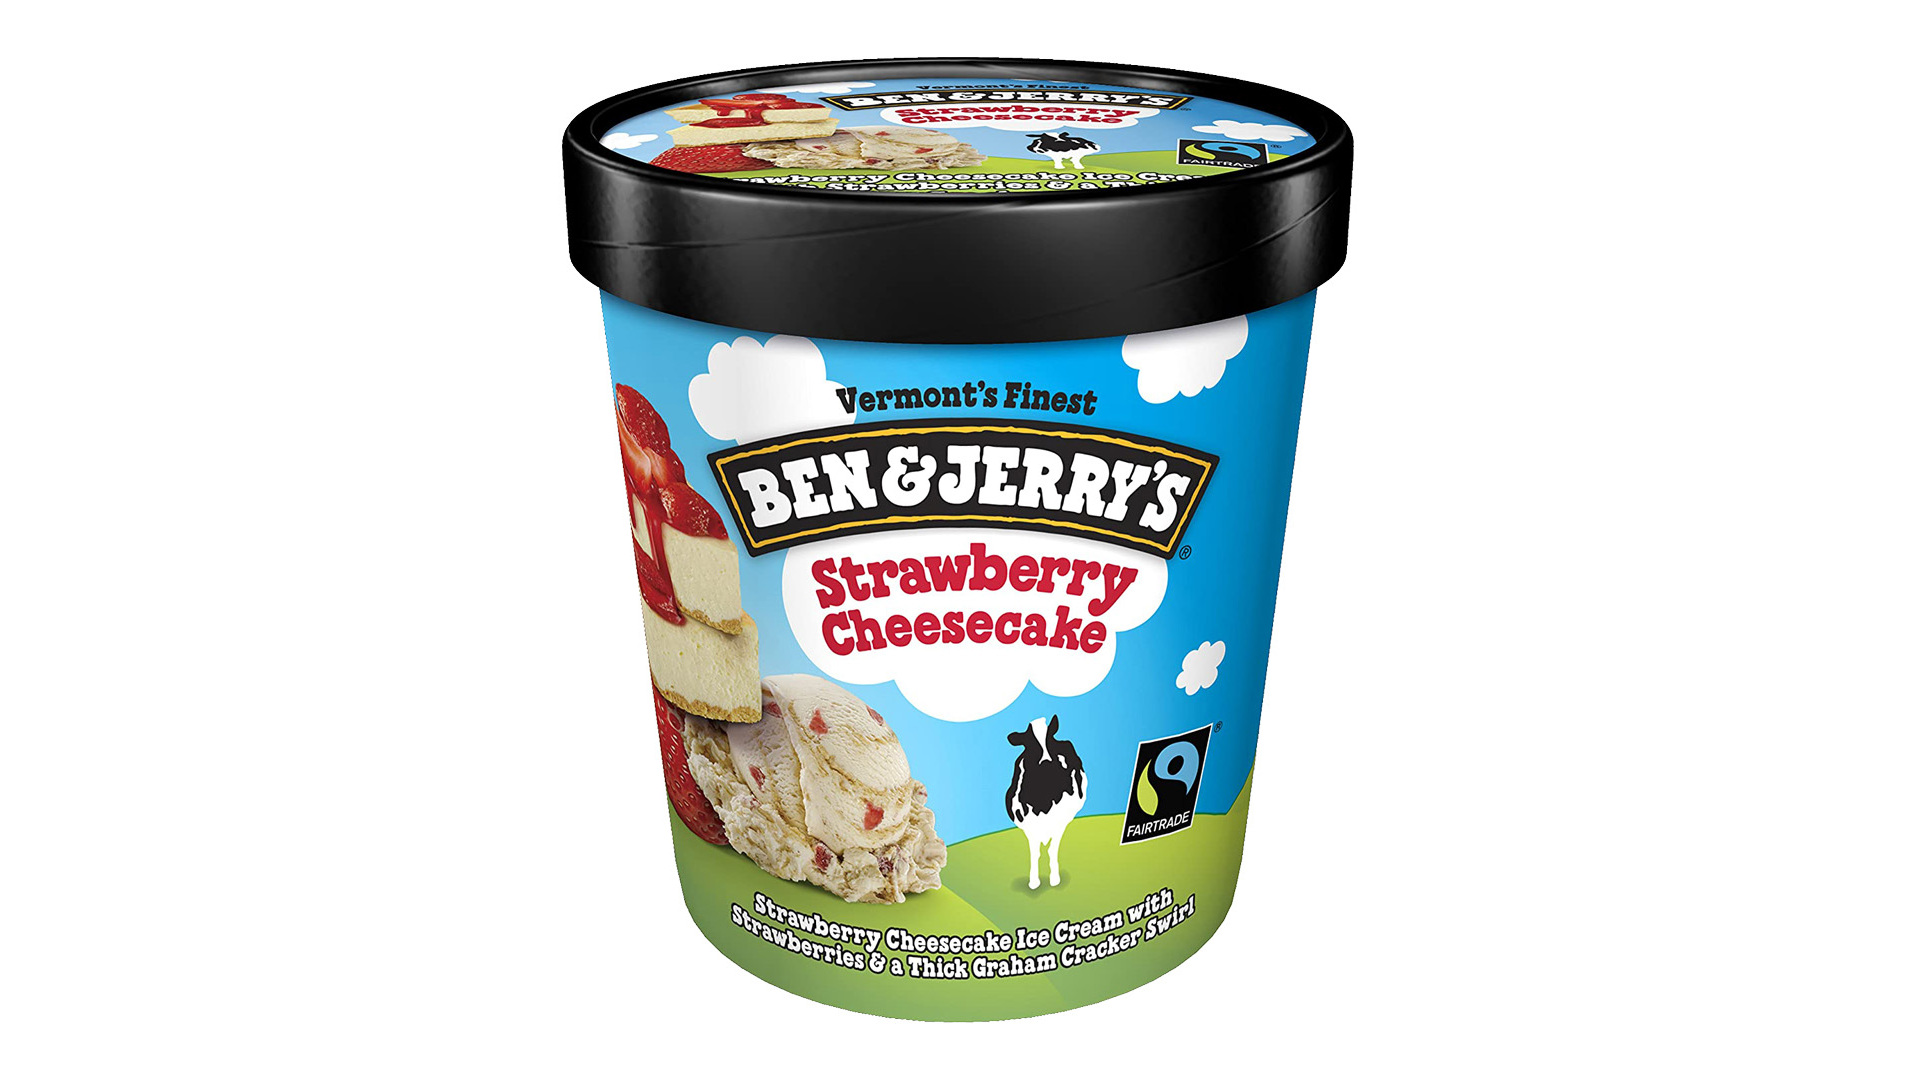 Ben & Jerry's Strawberry Cheesecake 500ml - Chicken Delivery in South Woodford E18